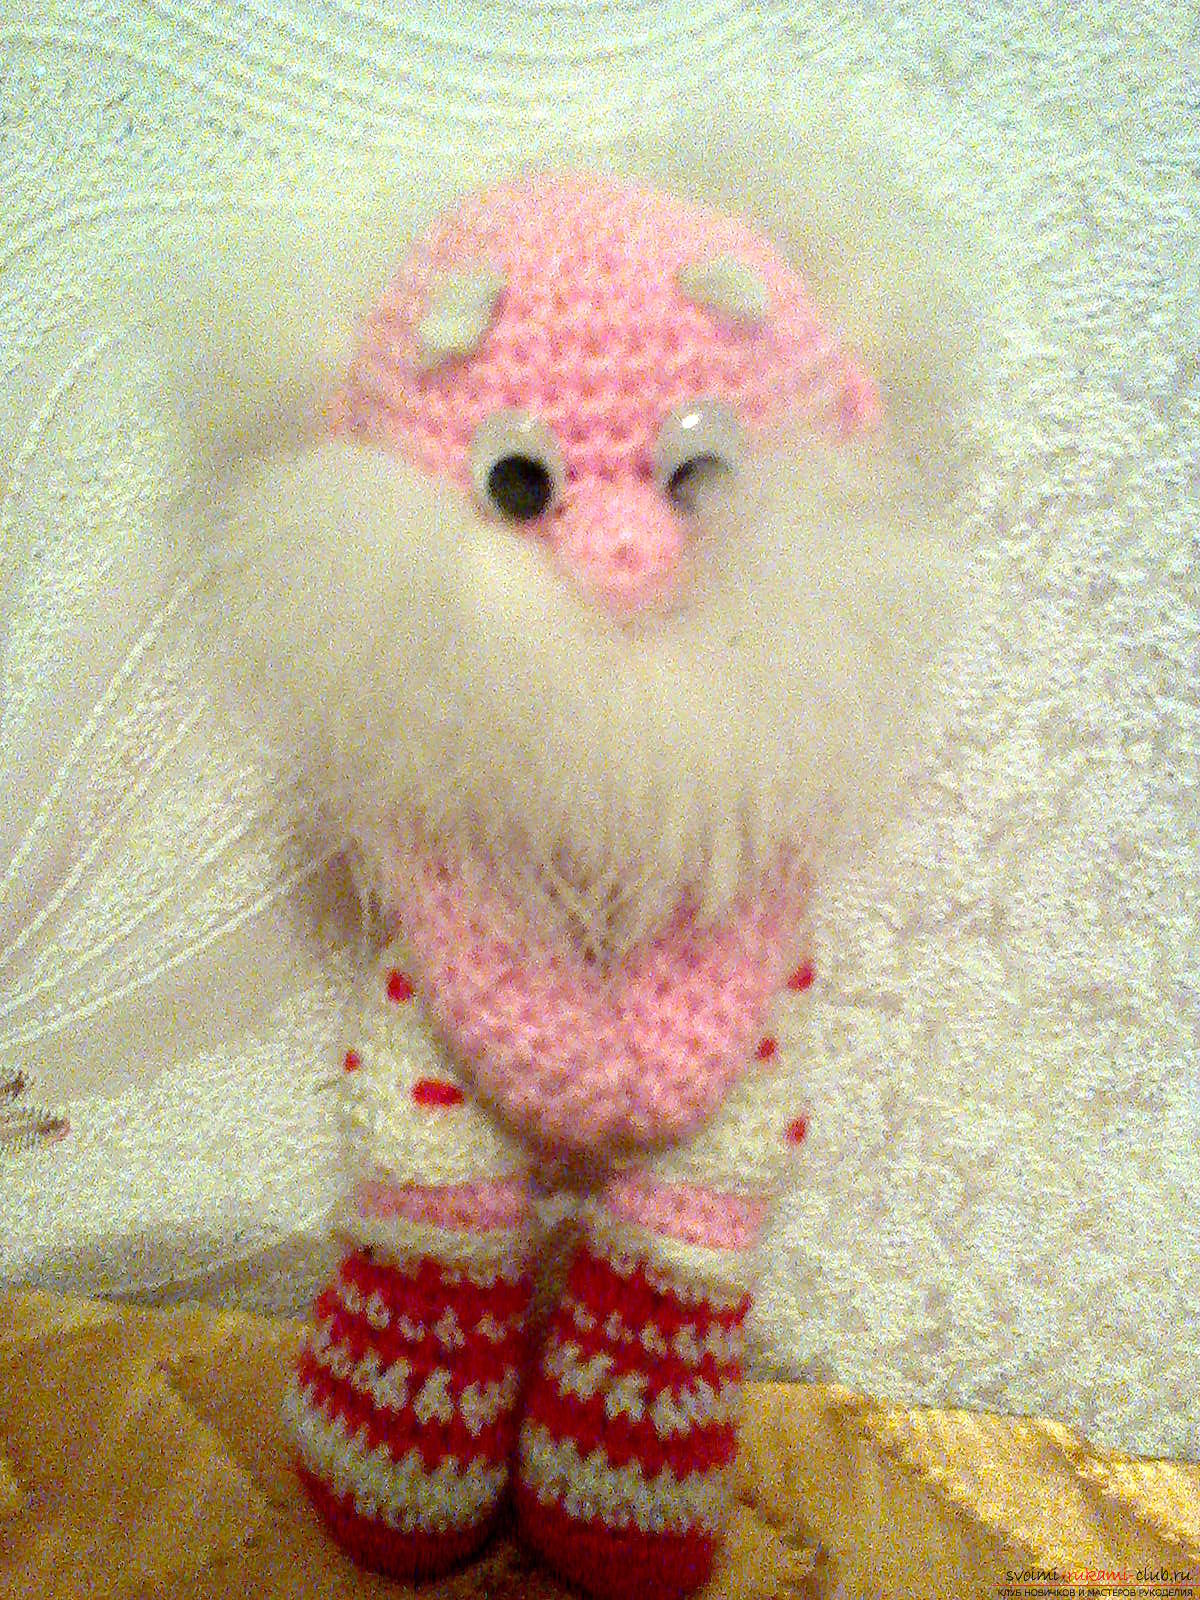 This handmade - a shy grandfather-bannik - is crocheted, it is a good idea for needlework. Photo №1